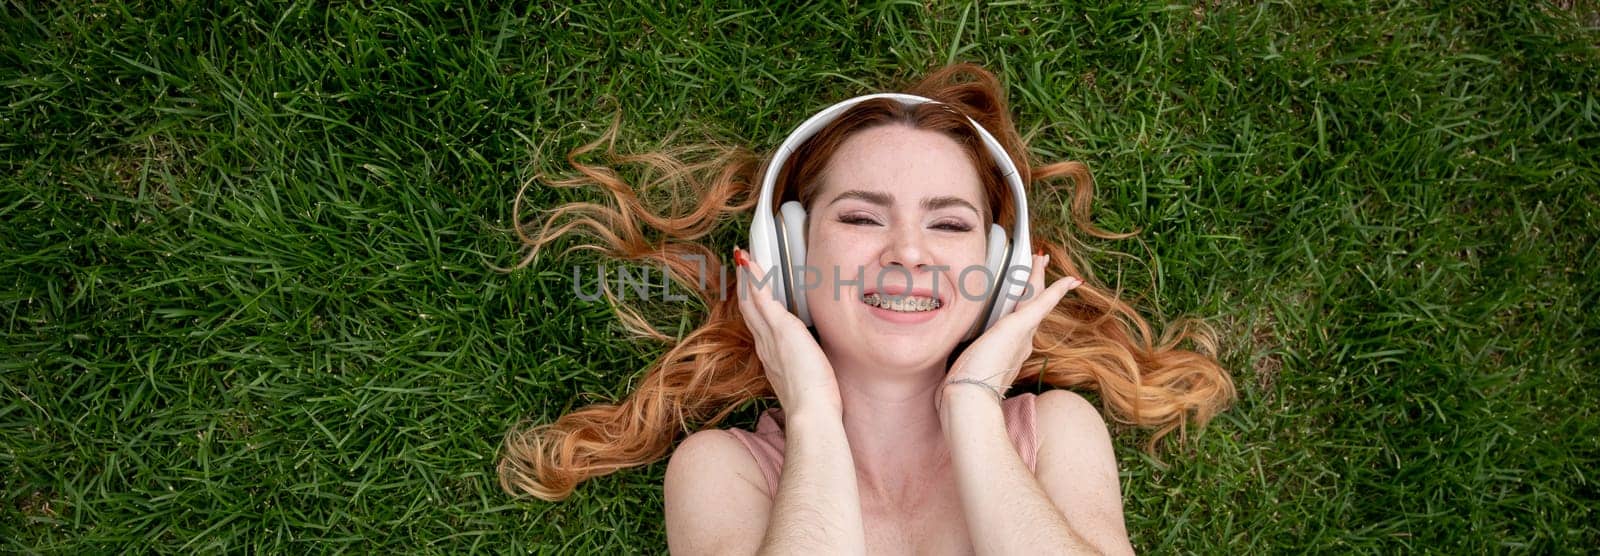 Top view of a young red-haired woman lying on the grass and listening to music on headphones. Widescreen. by mrwed54